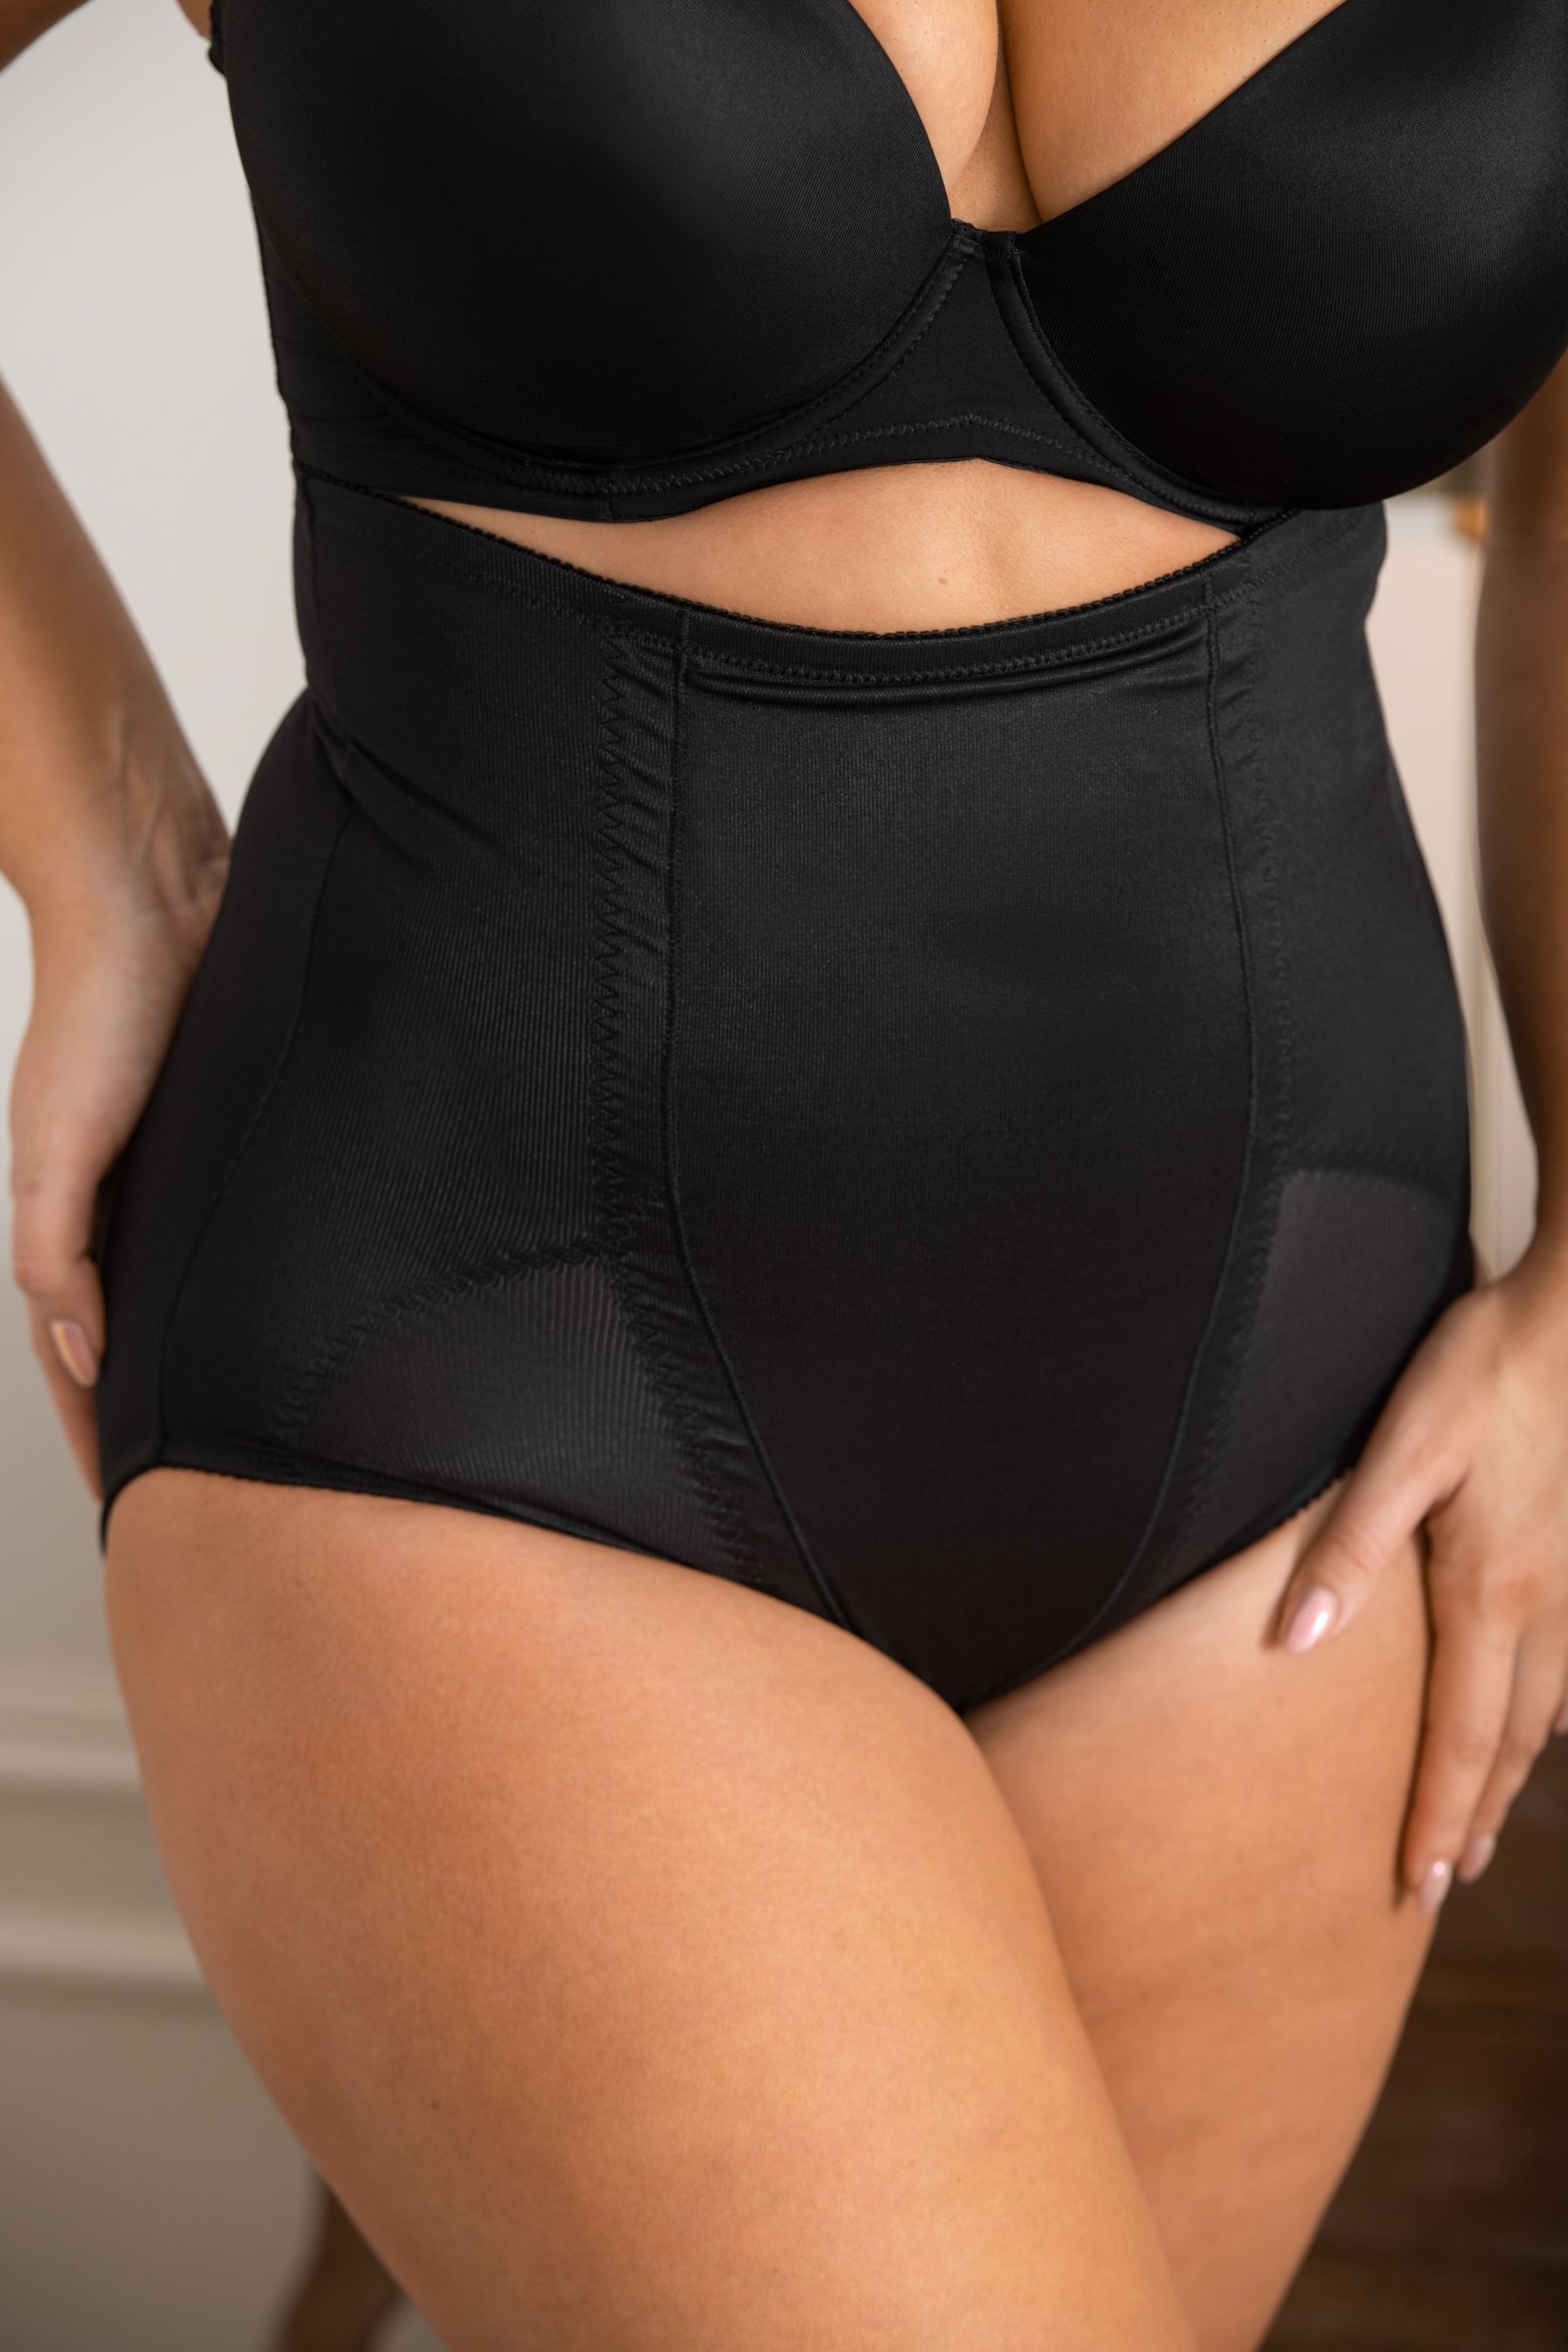 Pour Moi Lingerie Black Hourglass Shapewear Firm Tummy Control High Waist Knicker - Image 2 of 5